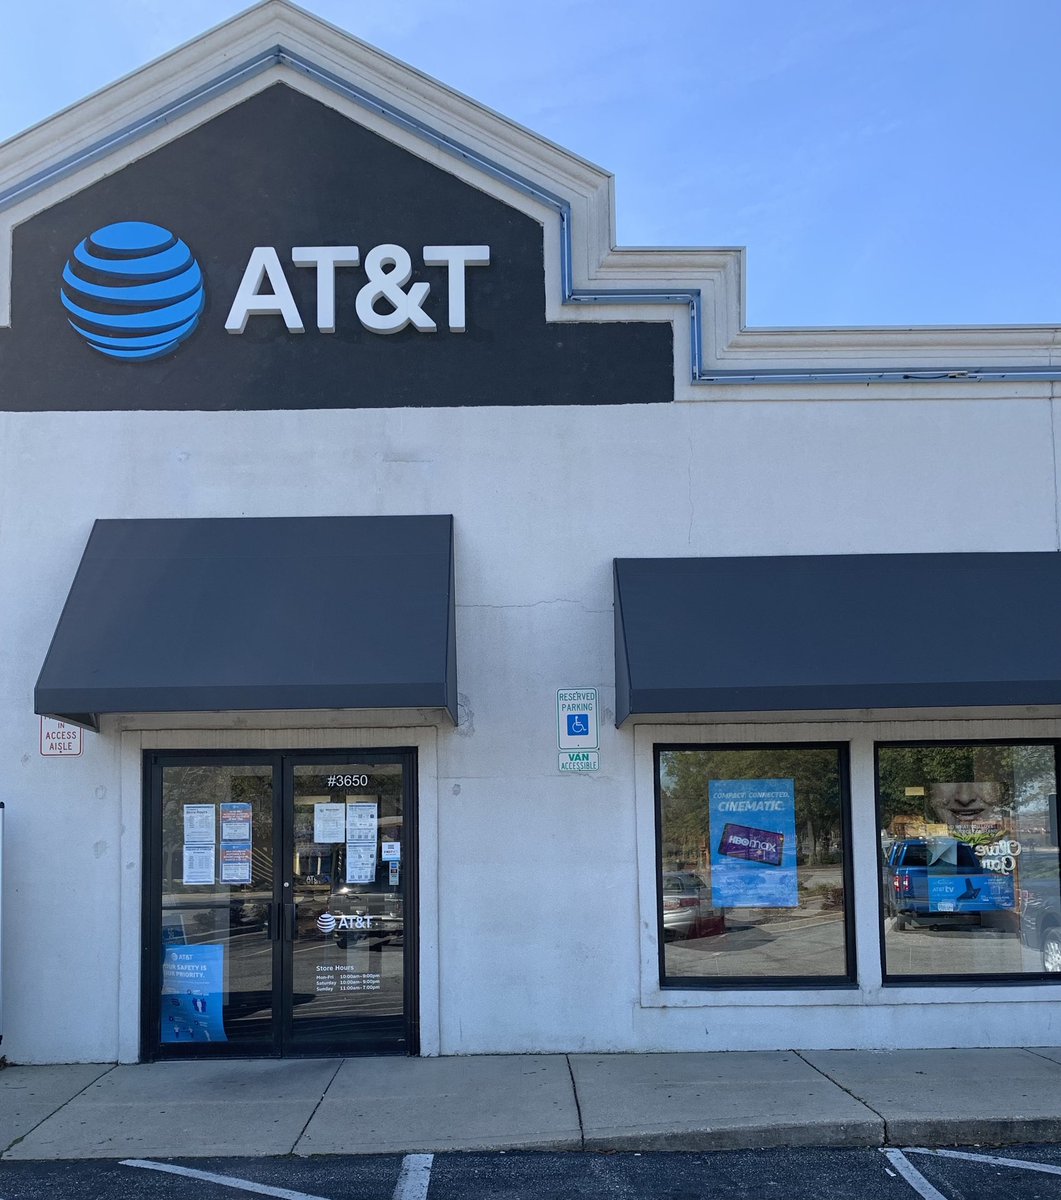 New beginnings, excited to announce a call to action to all leaders looking for an opportunity for growth and new challenges. Come join our team, now taking applicants for ASM at our AT&T Waldorf location in Maryland. #NewBeginnings #takethechallenge